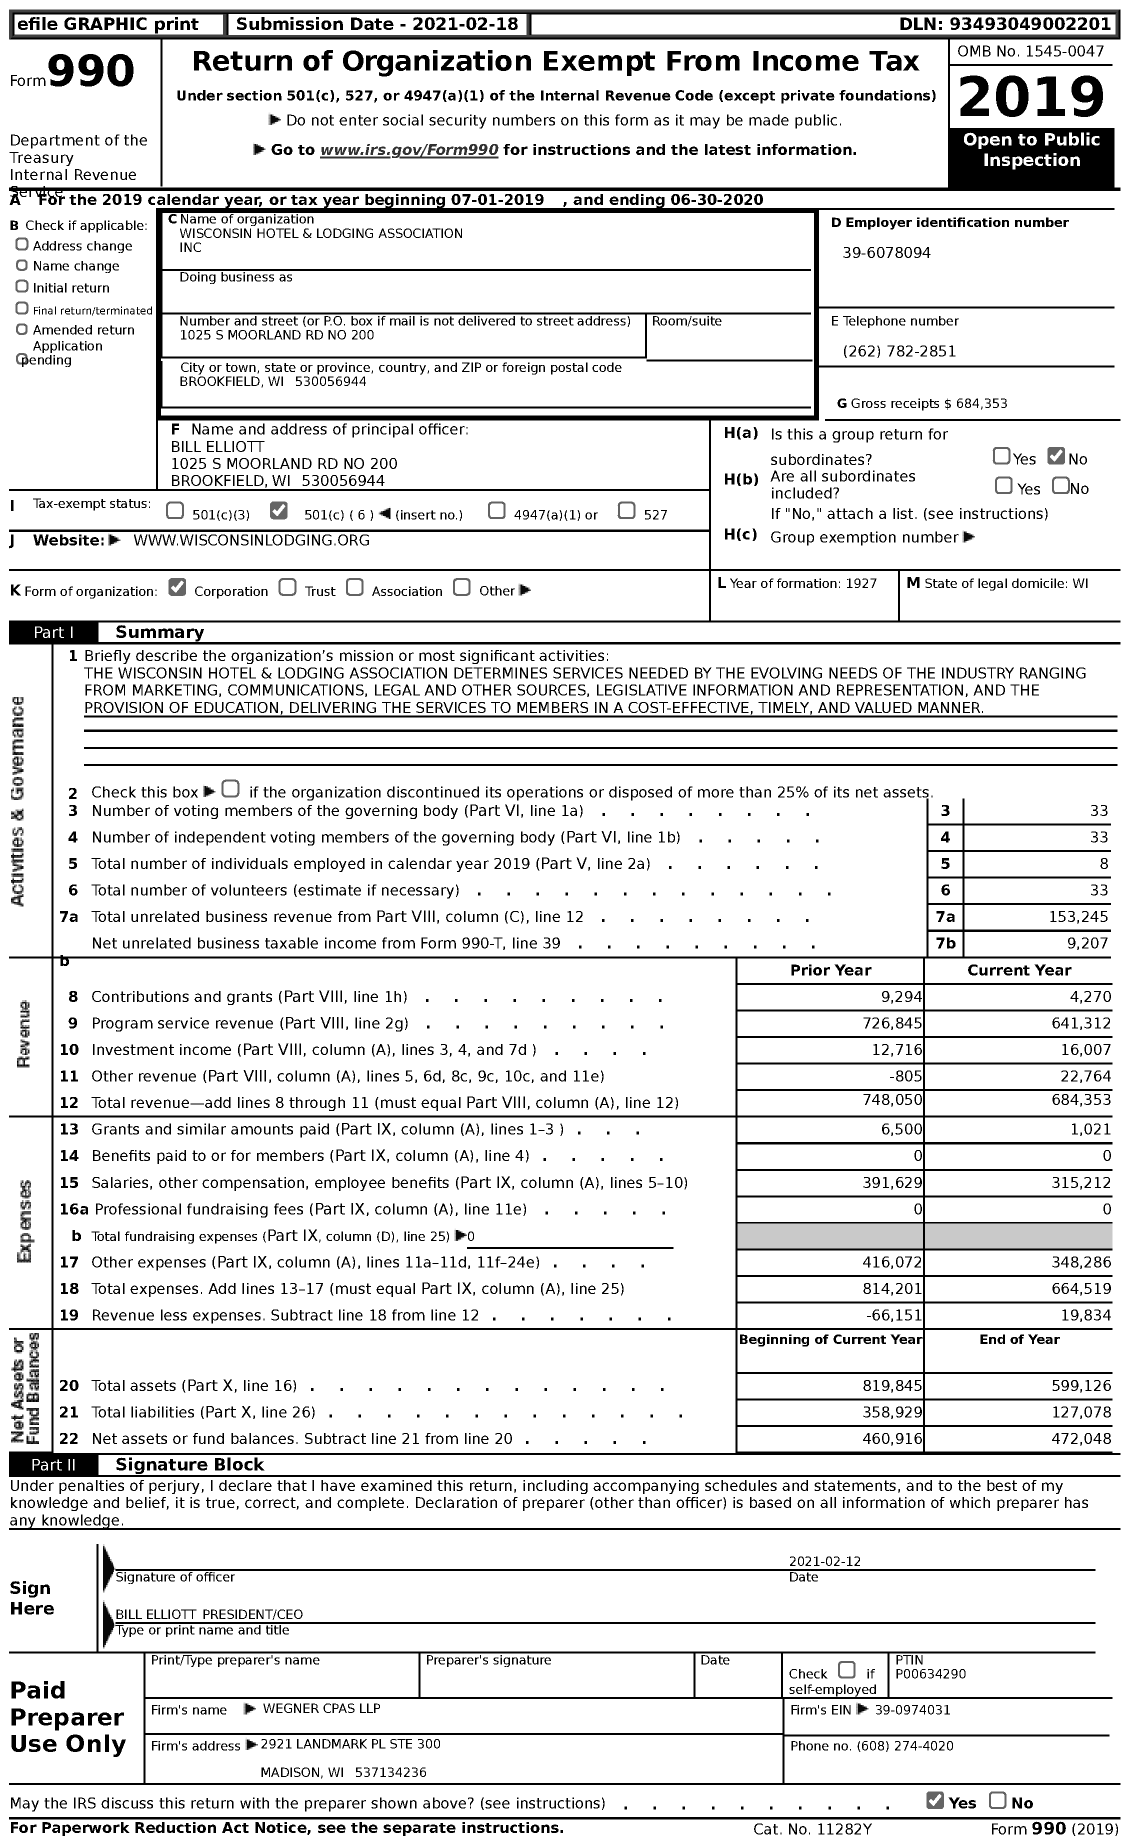 Image of first page of 2019 Form 990 for Wisconsin Hotel & Lodging Association (WH&LA)